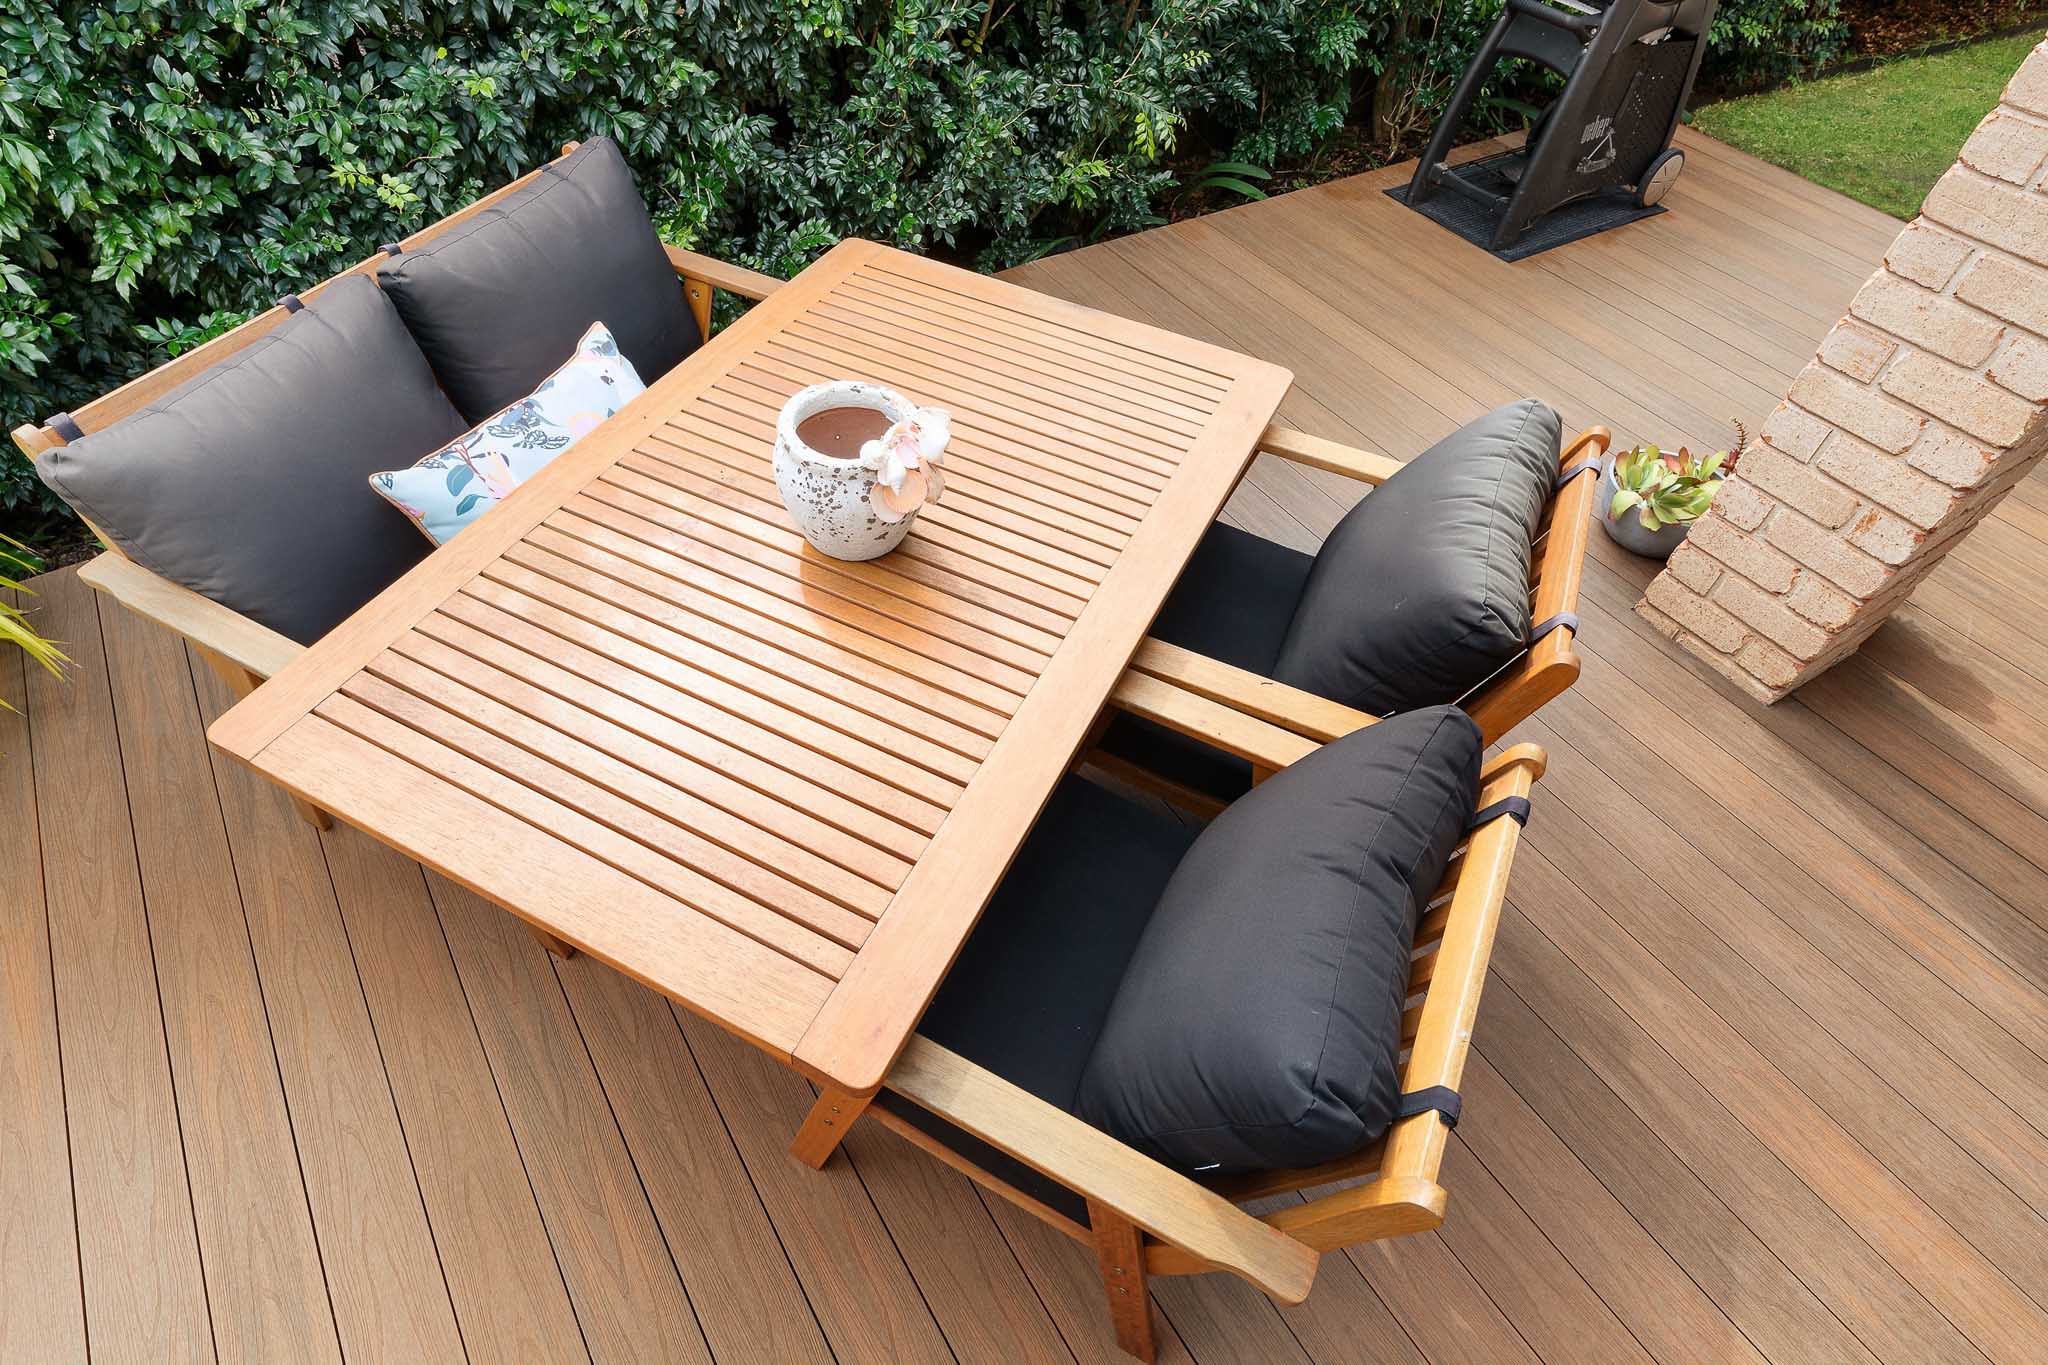 A close up of a wooden table and 4 patio chairs